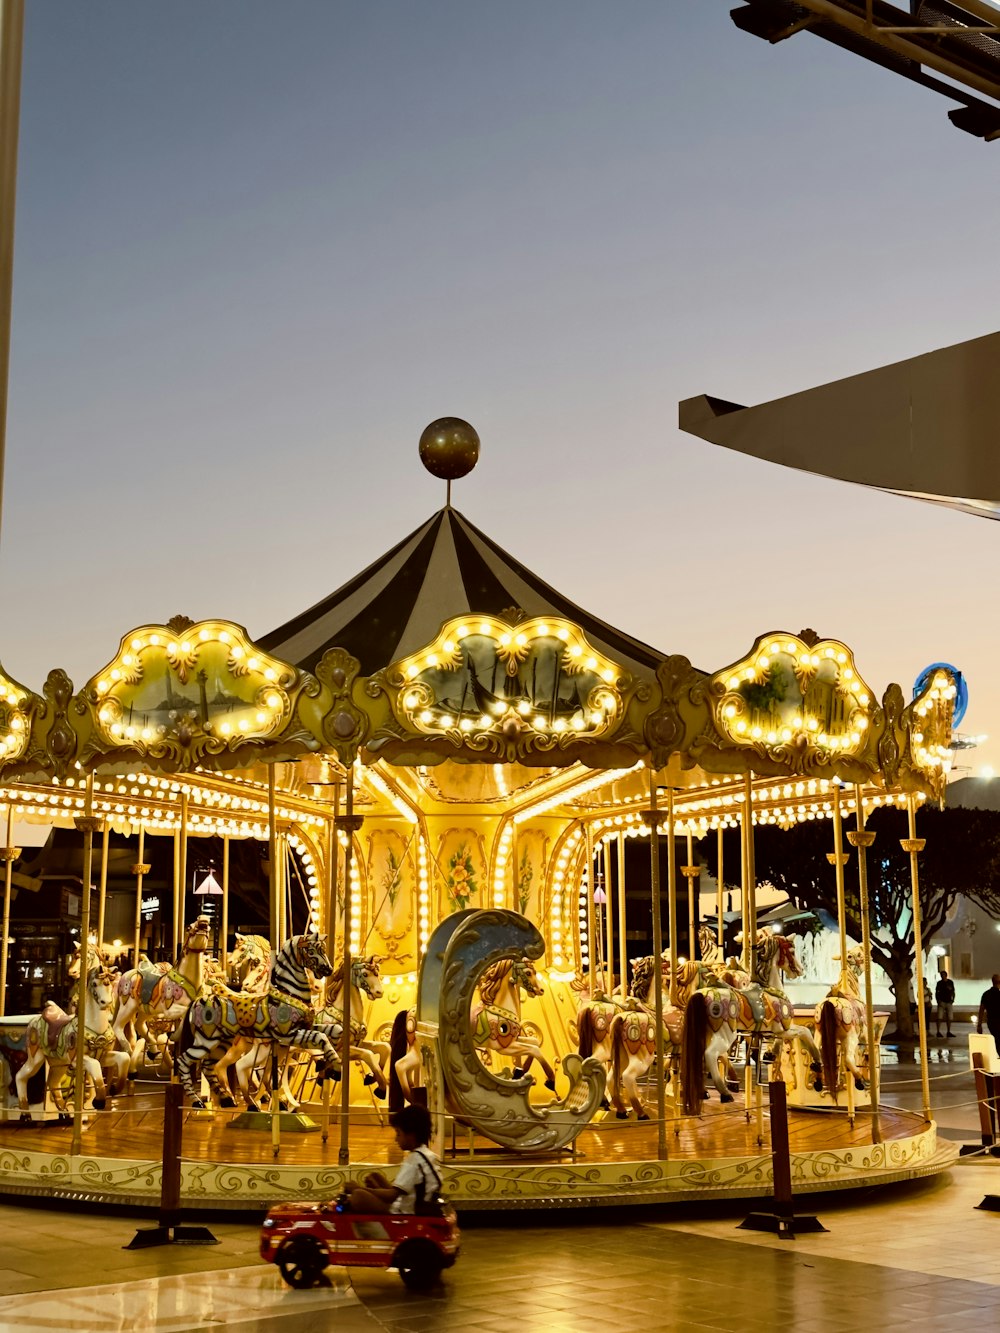 a merry go round with people riding on it